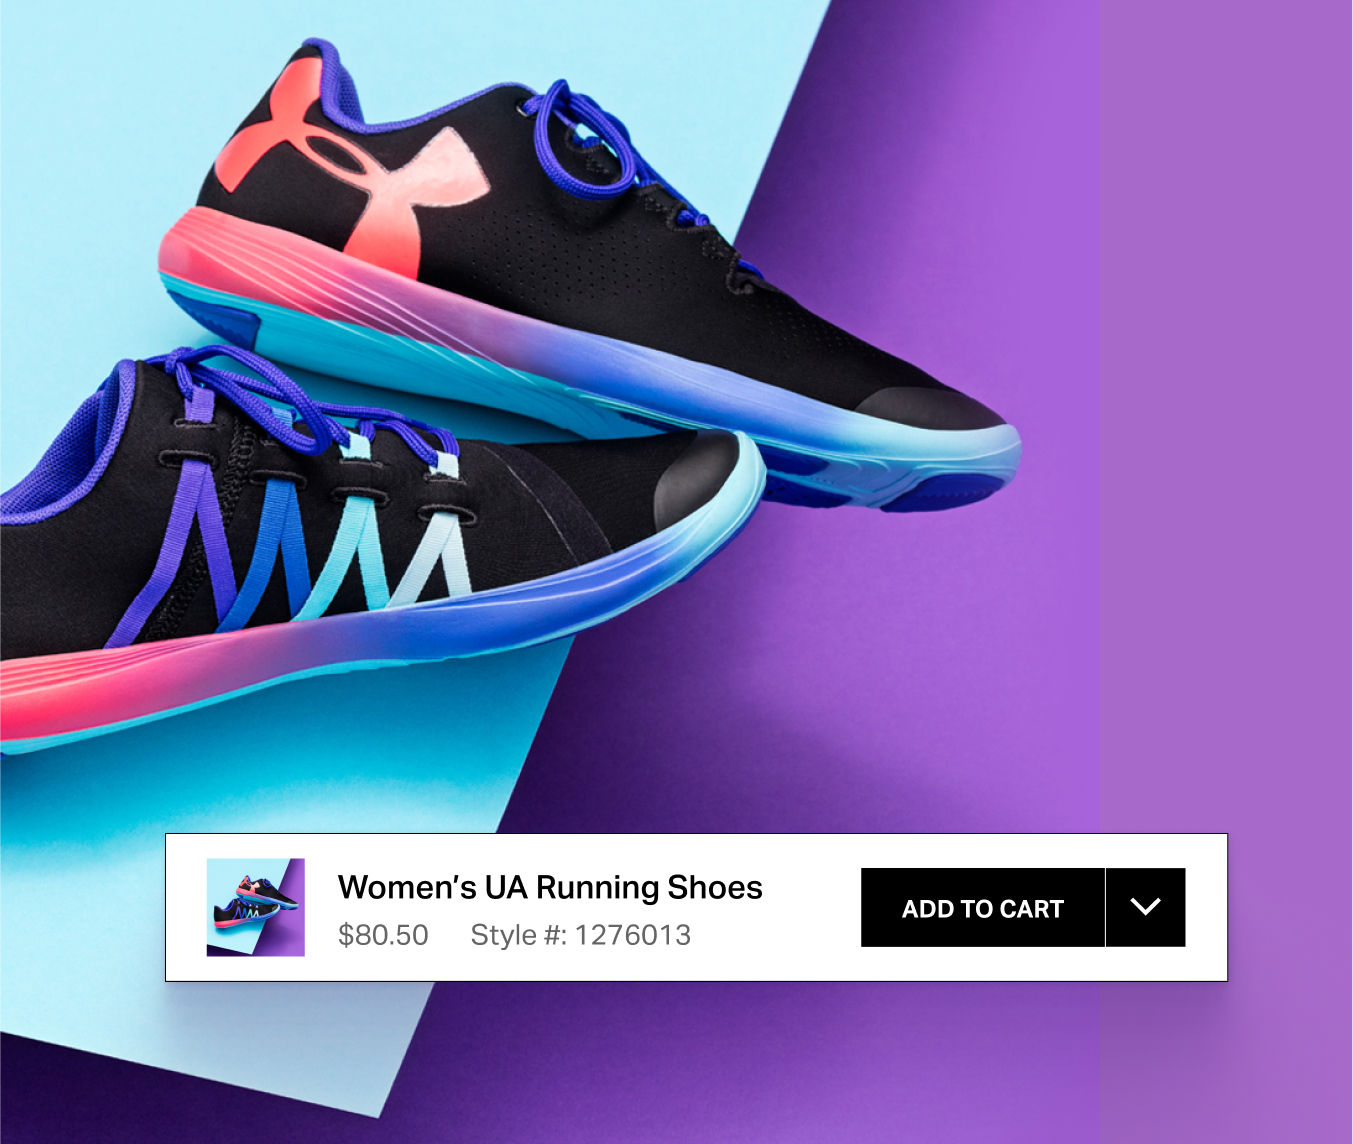 UI/UX internationalization of Under Armour’s front end.